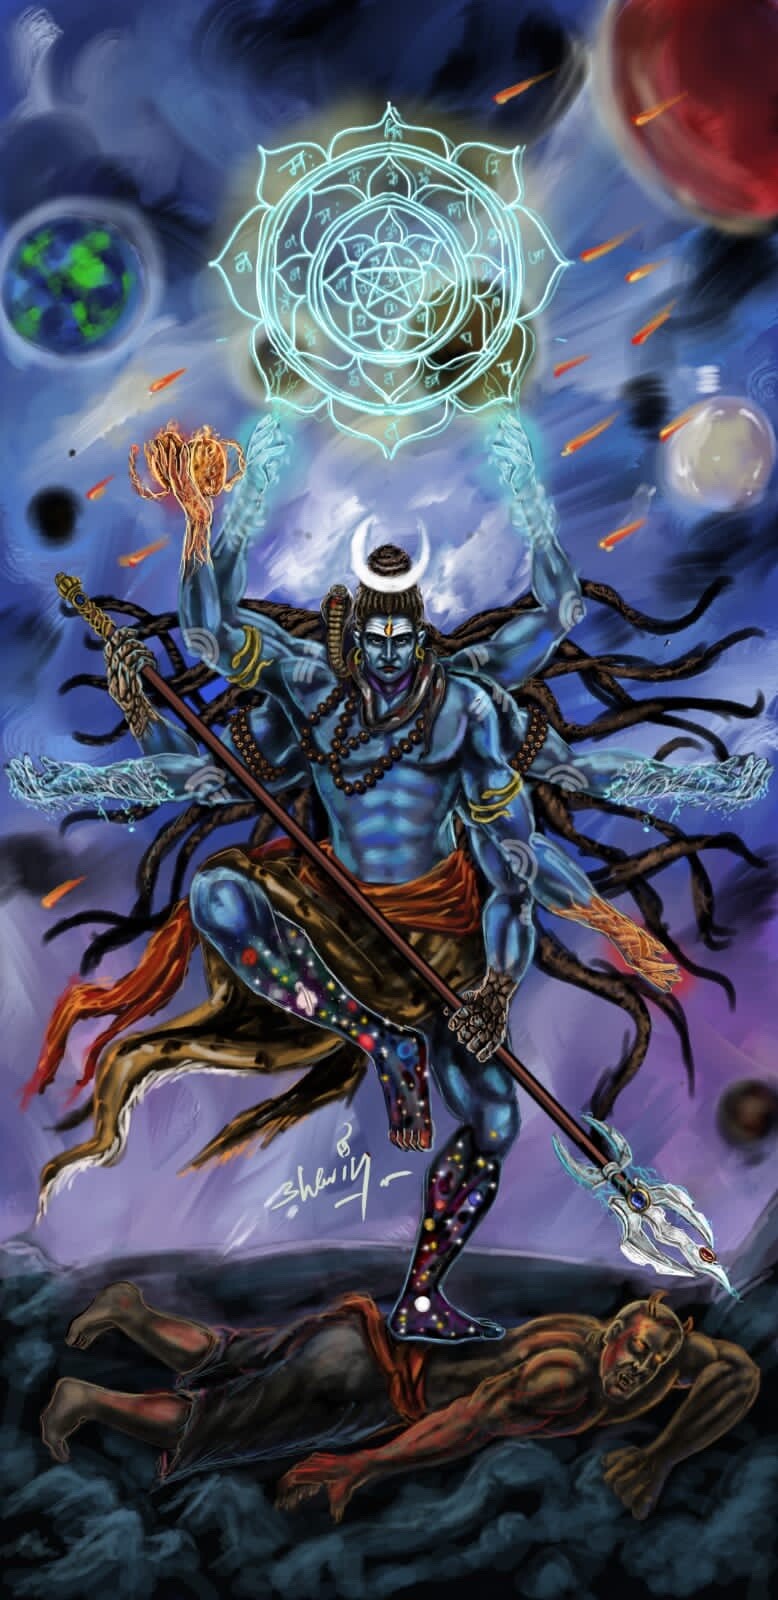 Massive Collection of 4K Lord Shiva Rudra Images - 999+ Astonishing ...